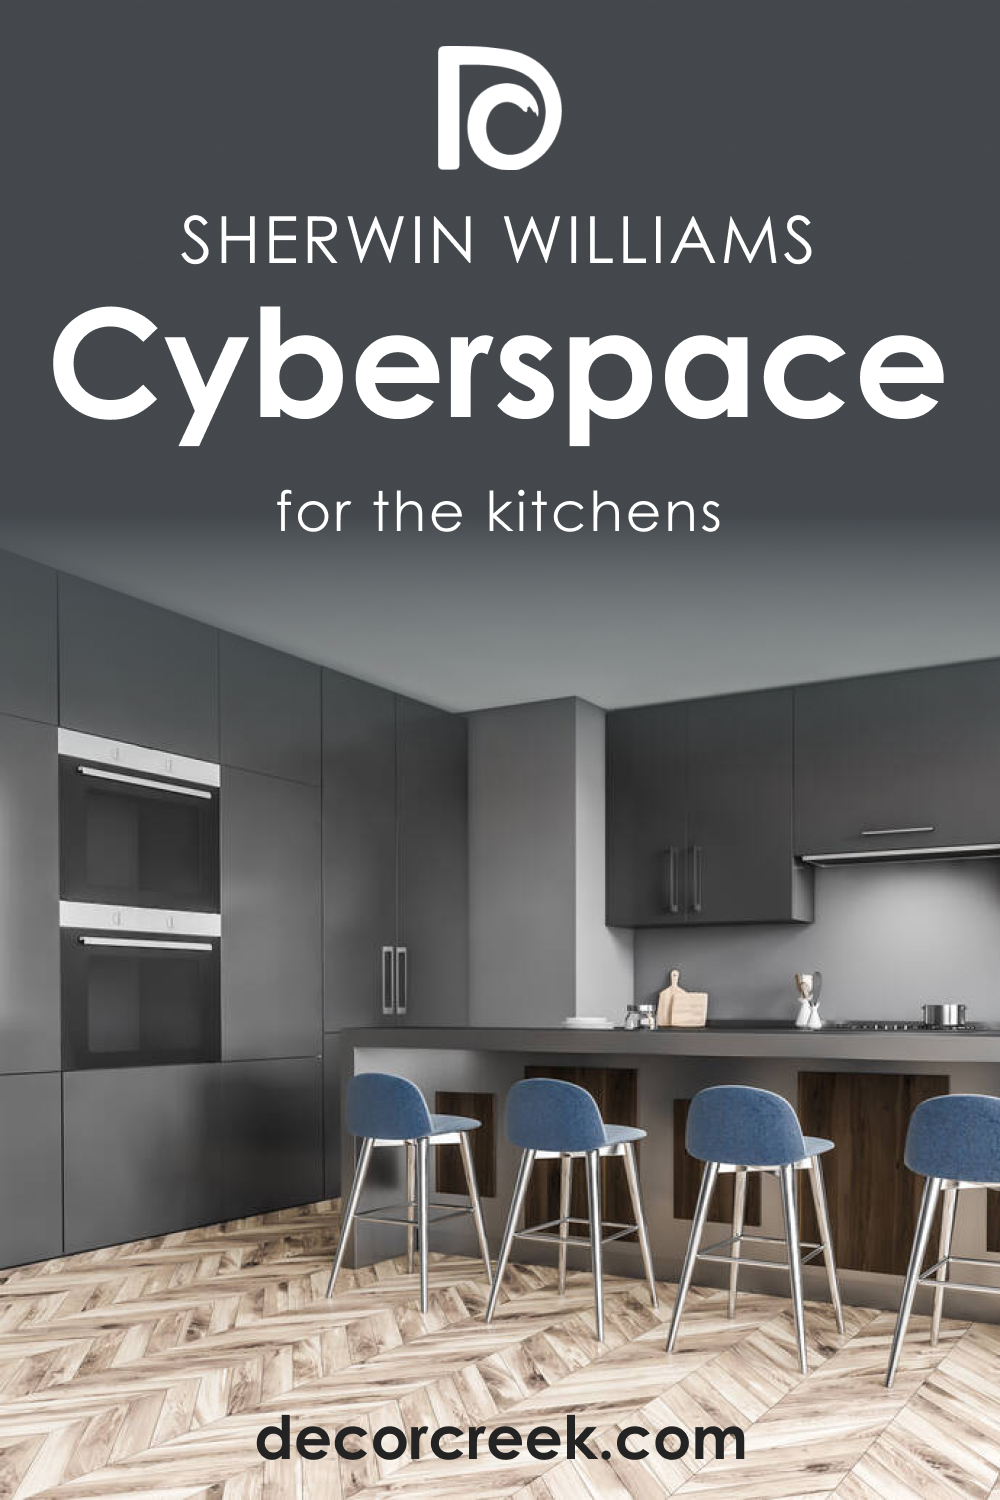 How to Use SW 7076 Cyberspace for the Kitchen?